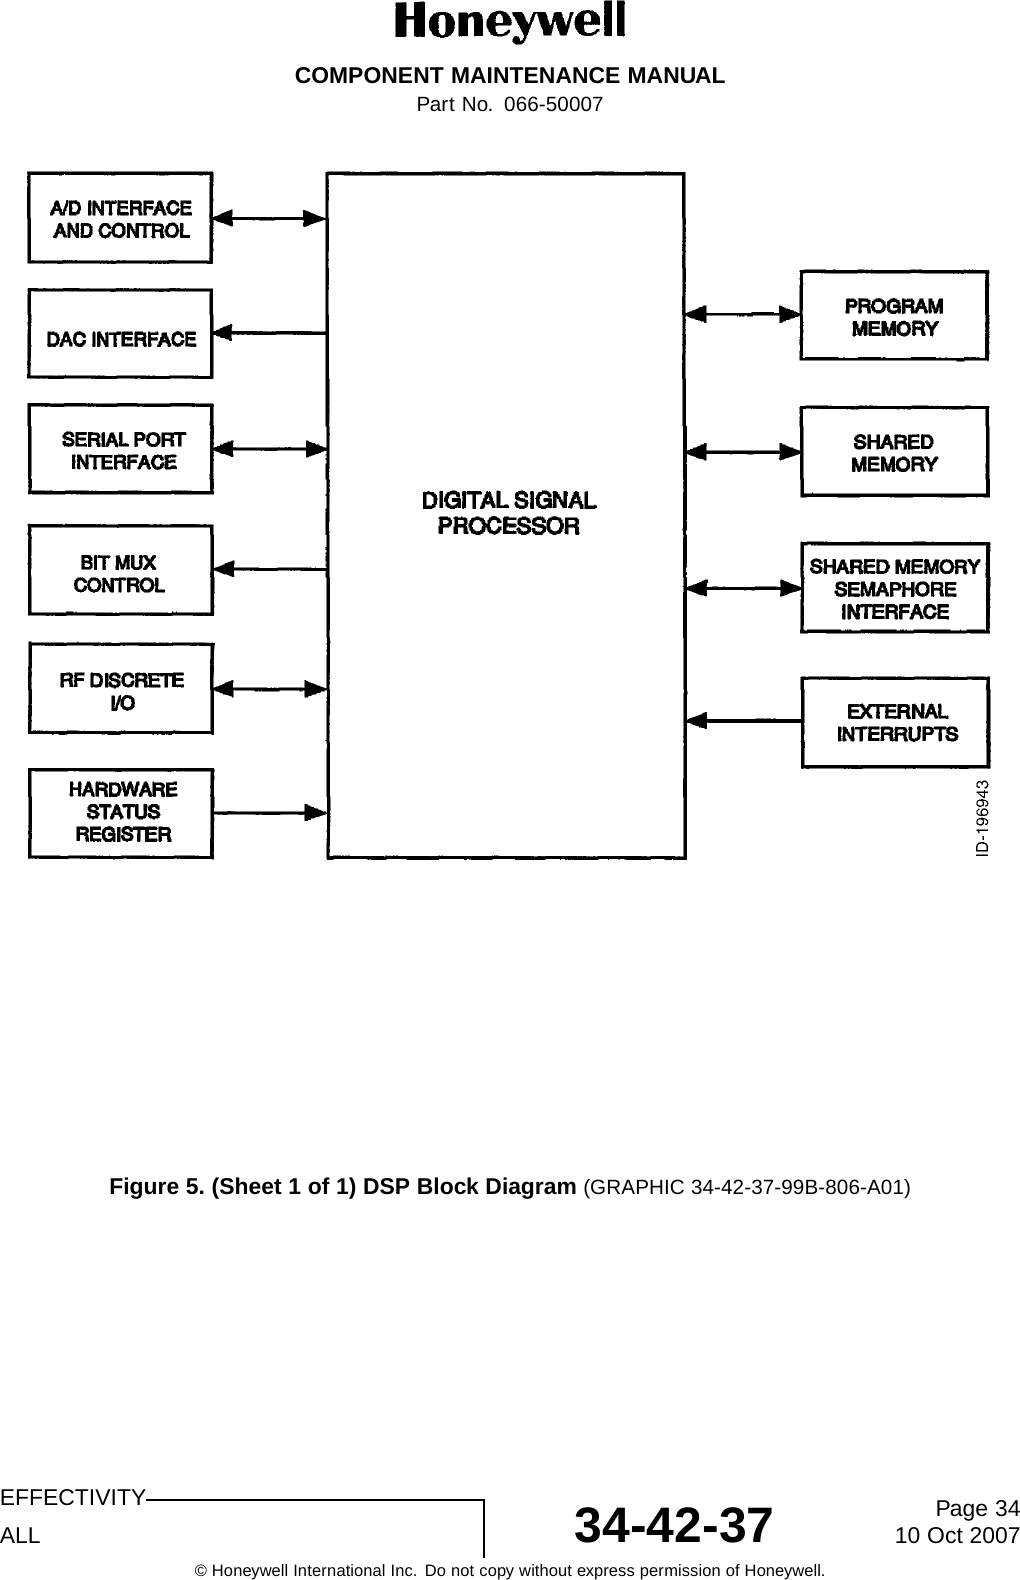 COMPONENT MAINTENANCE MANUALPart No. 066-50007Figure 5. (Sheet 1 of 1) DSP Block Diagram (GRAPHIC 34-42-37-99B-806-A01)EFFECTIVITYALL 34-42-37 Page 3410 Oct 2007© Honeywell International Inc. Do not copy without express permission of Honeywell.